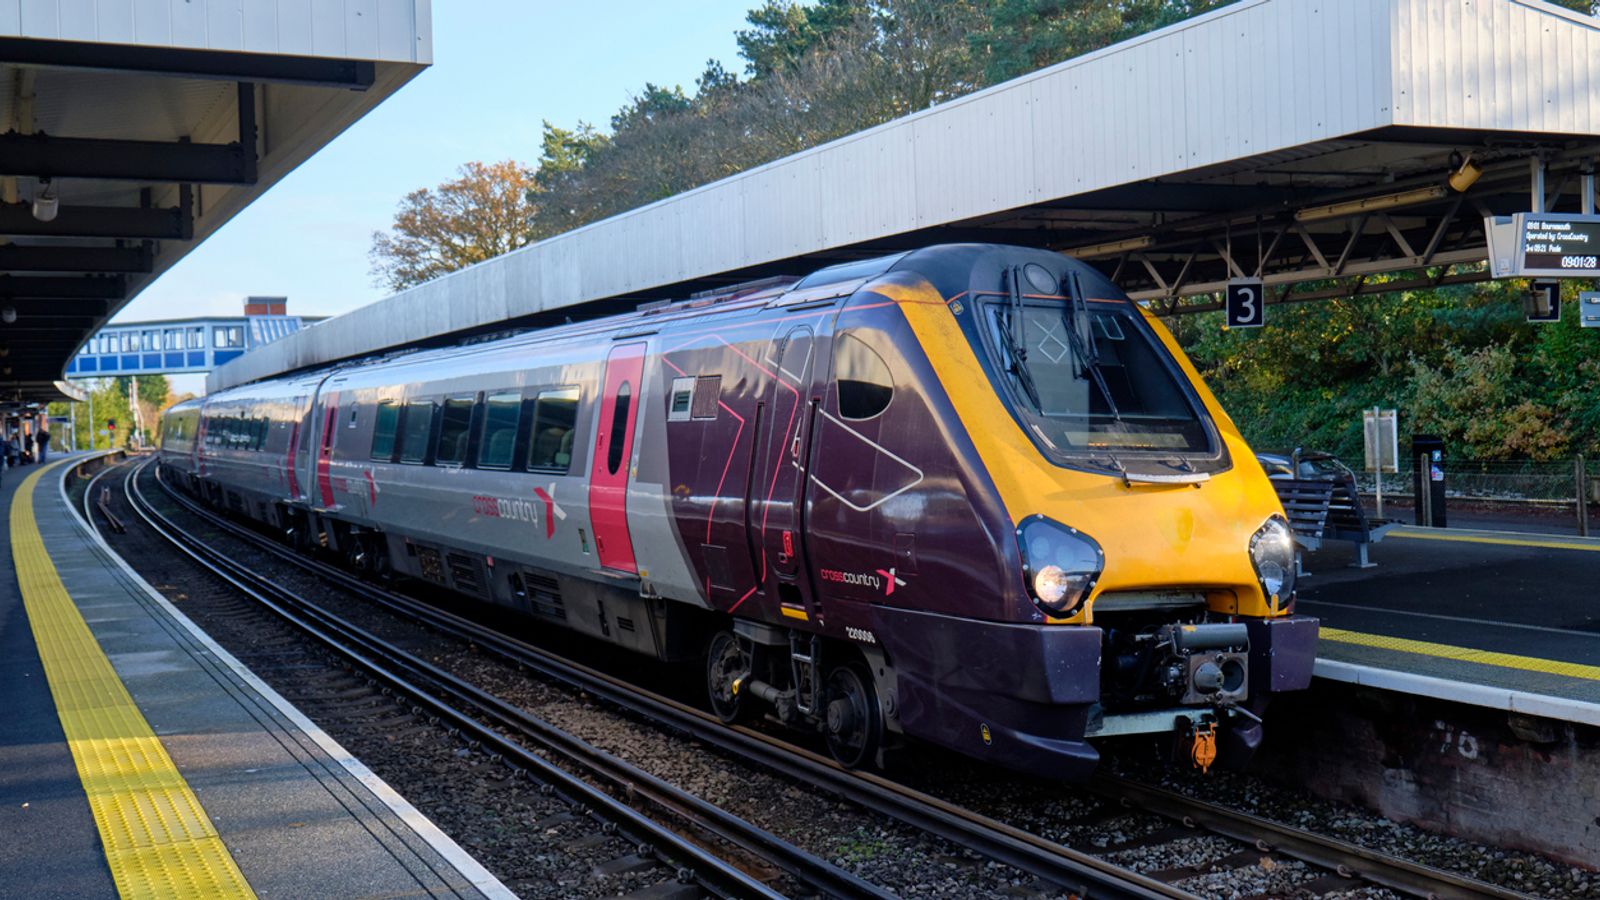 Network Rail warned over increased delays to trains